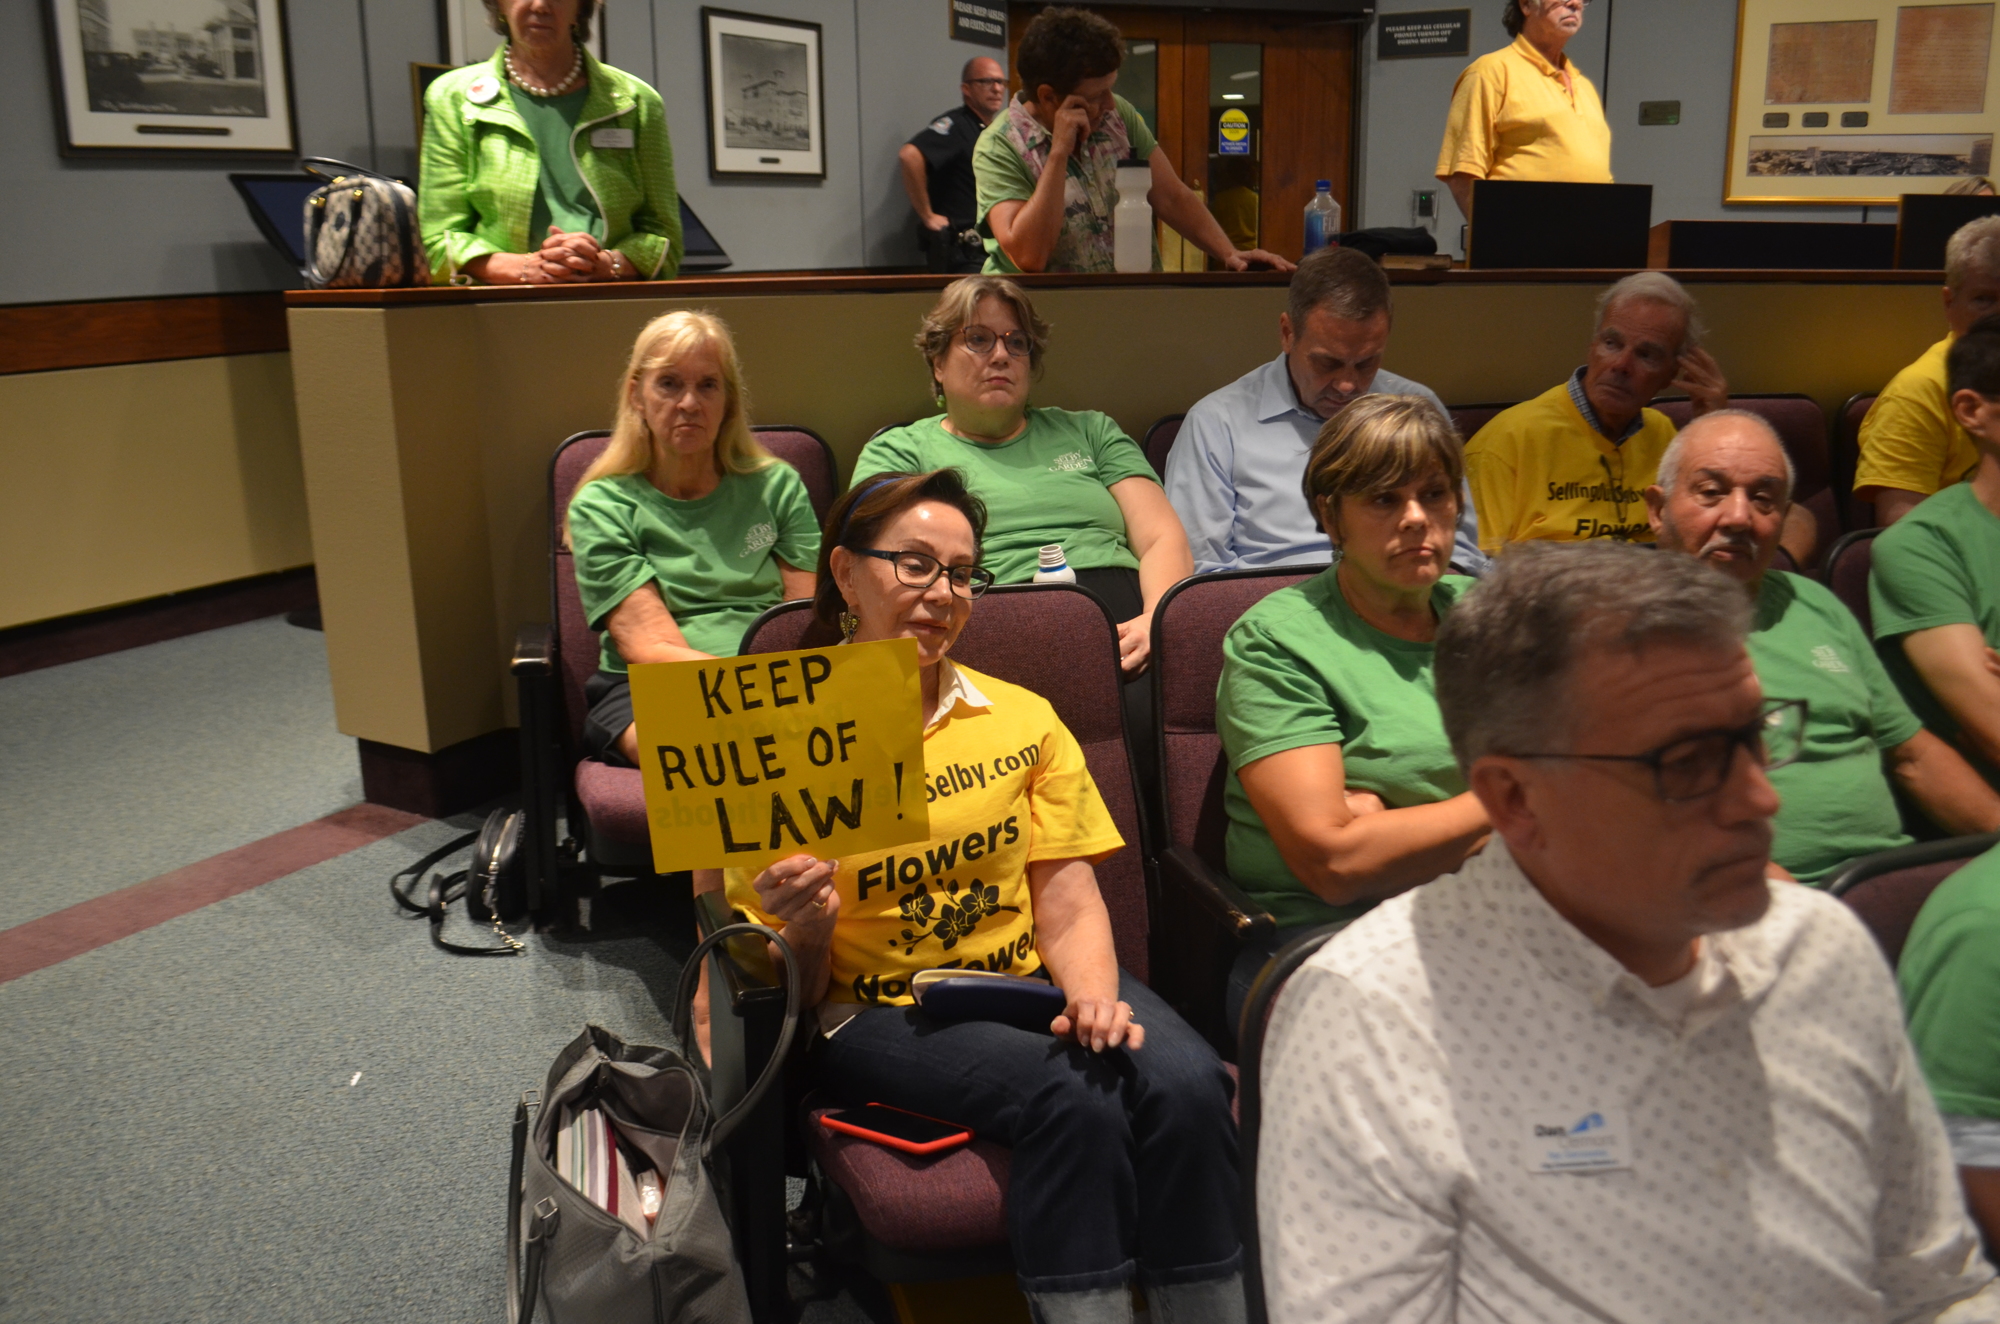 Support and opposition to the Selby Gardens master plan was vocal.